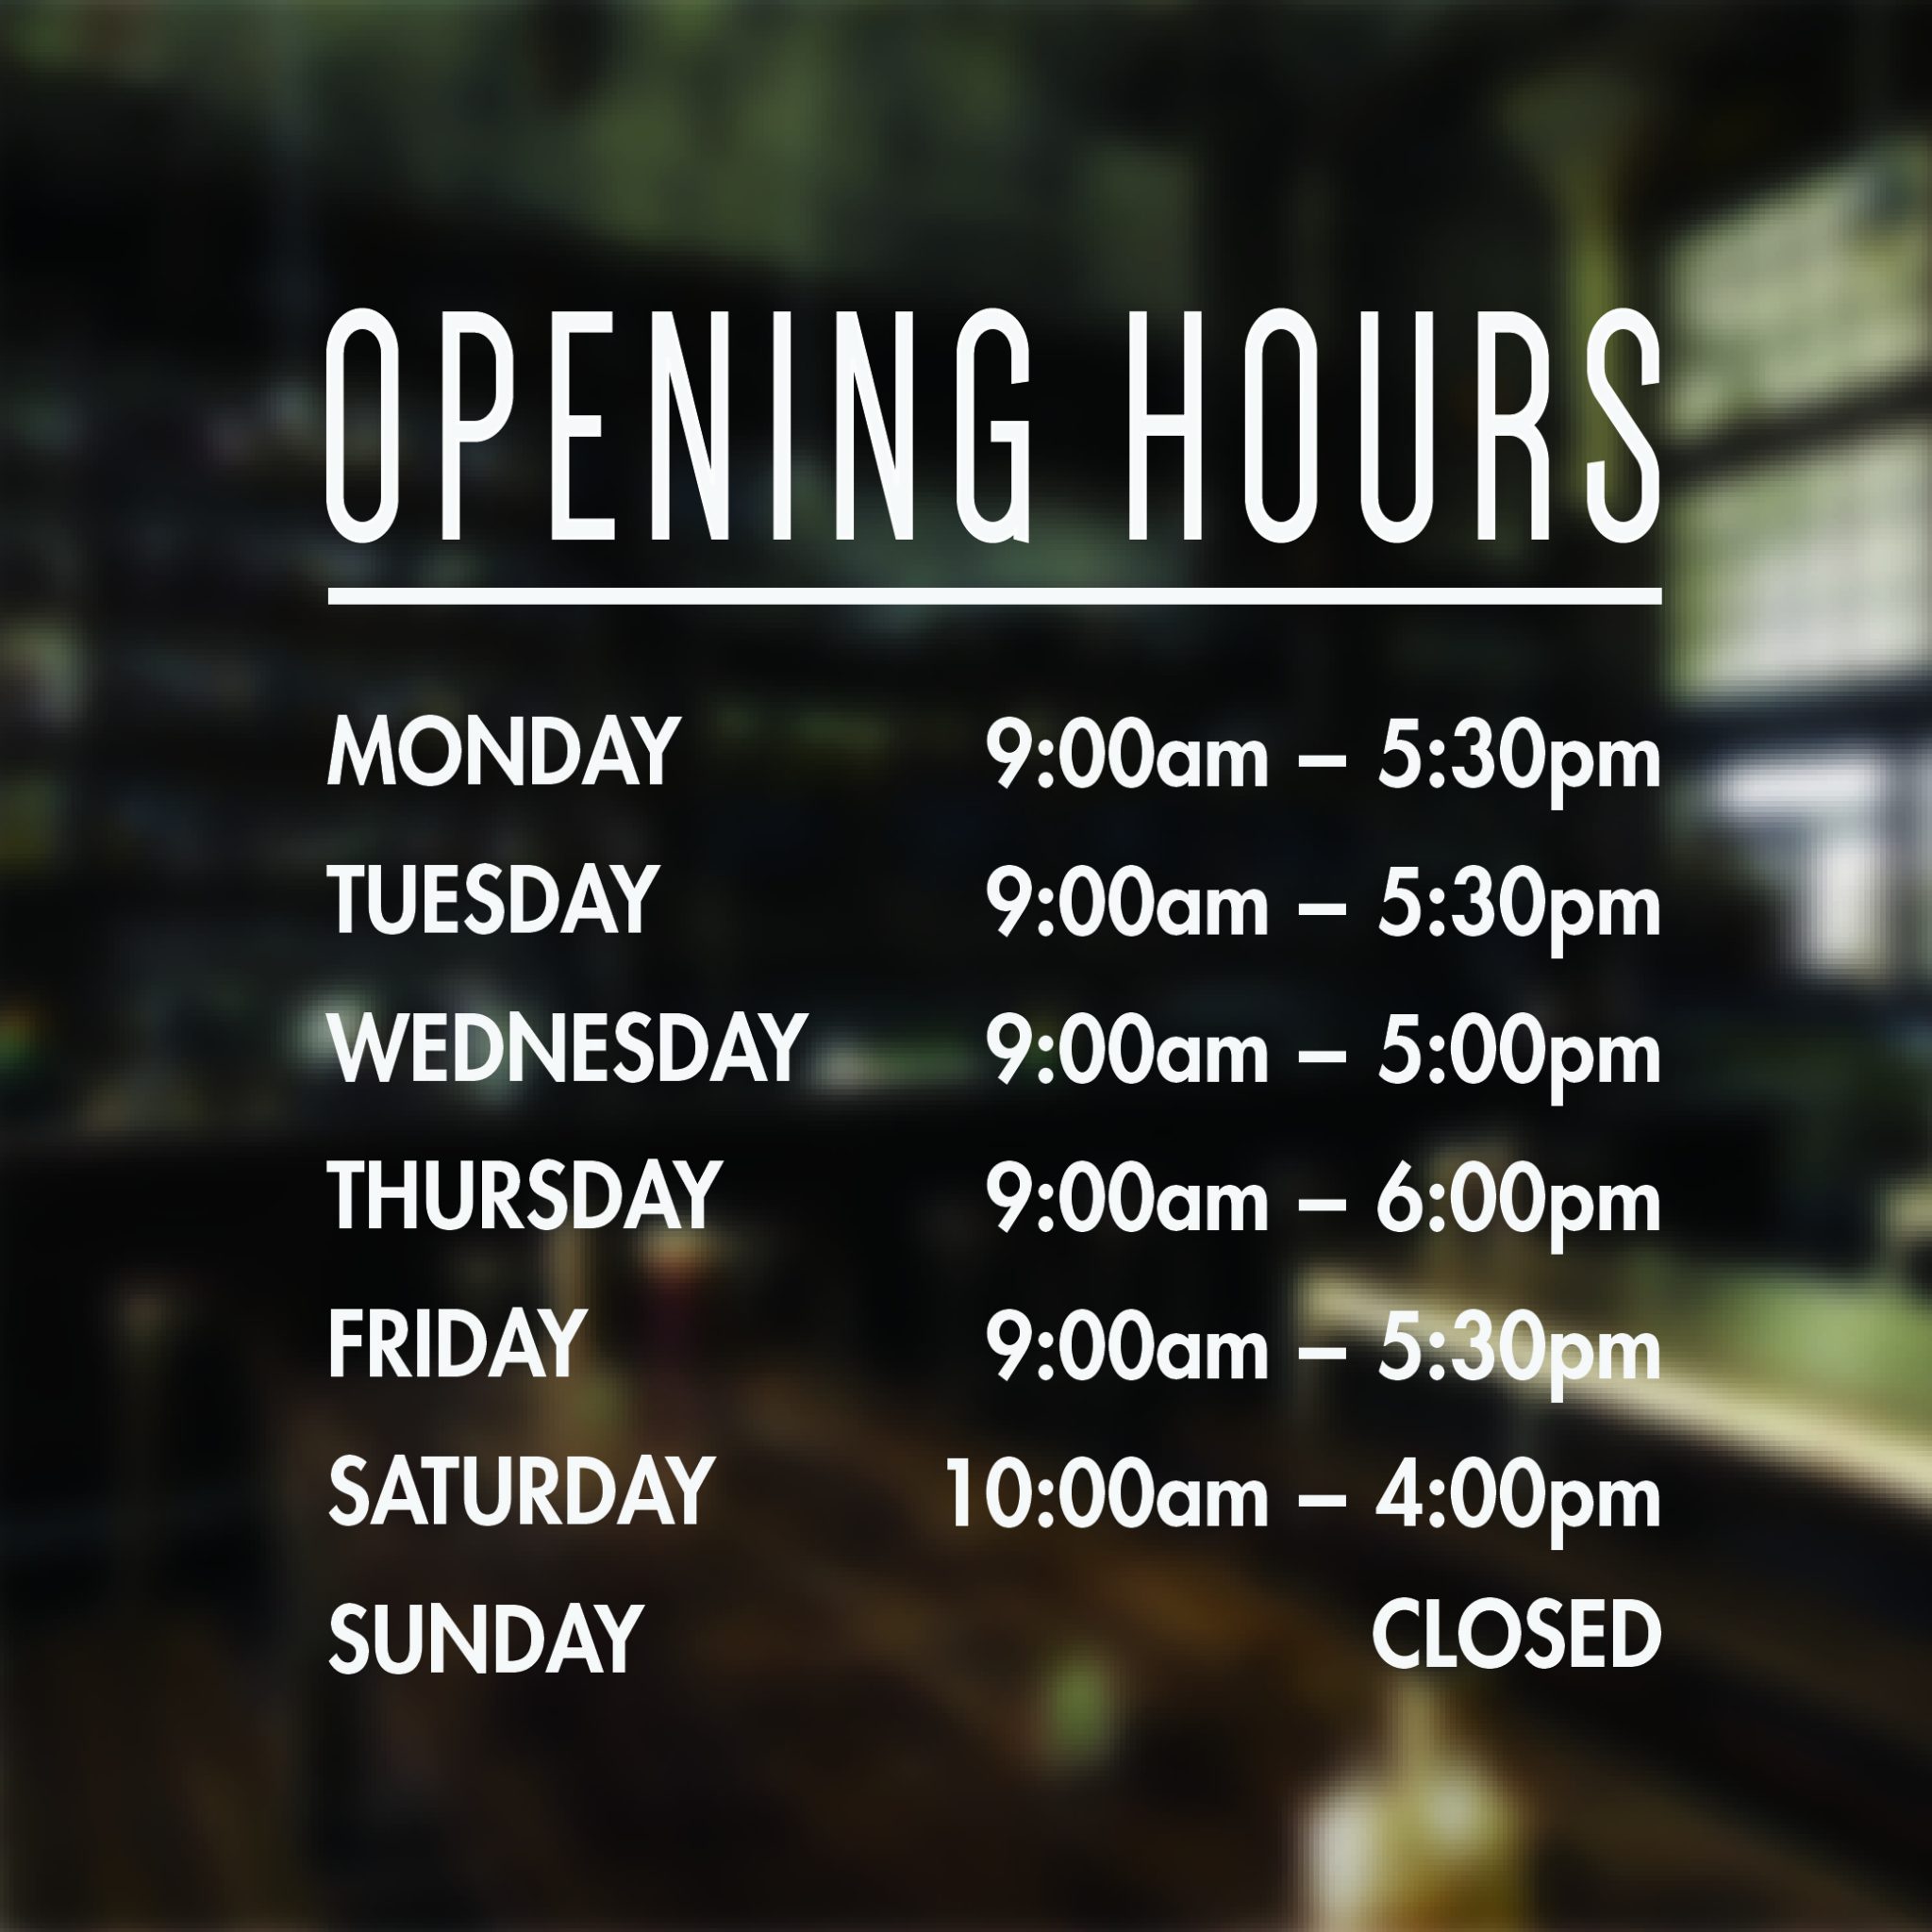 Opening Hours Times Shop Custom Vinyl Sign Sticker Decal 40cm wide 